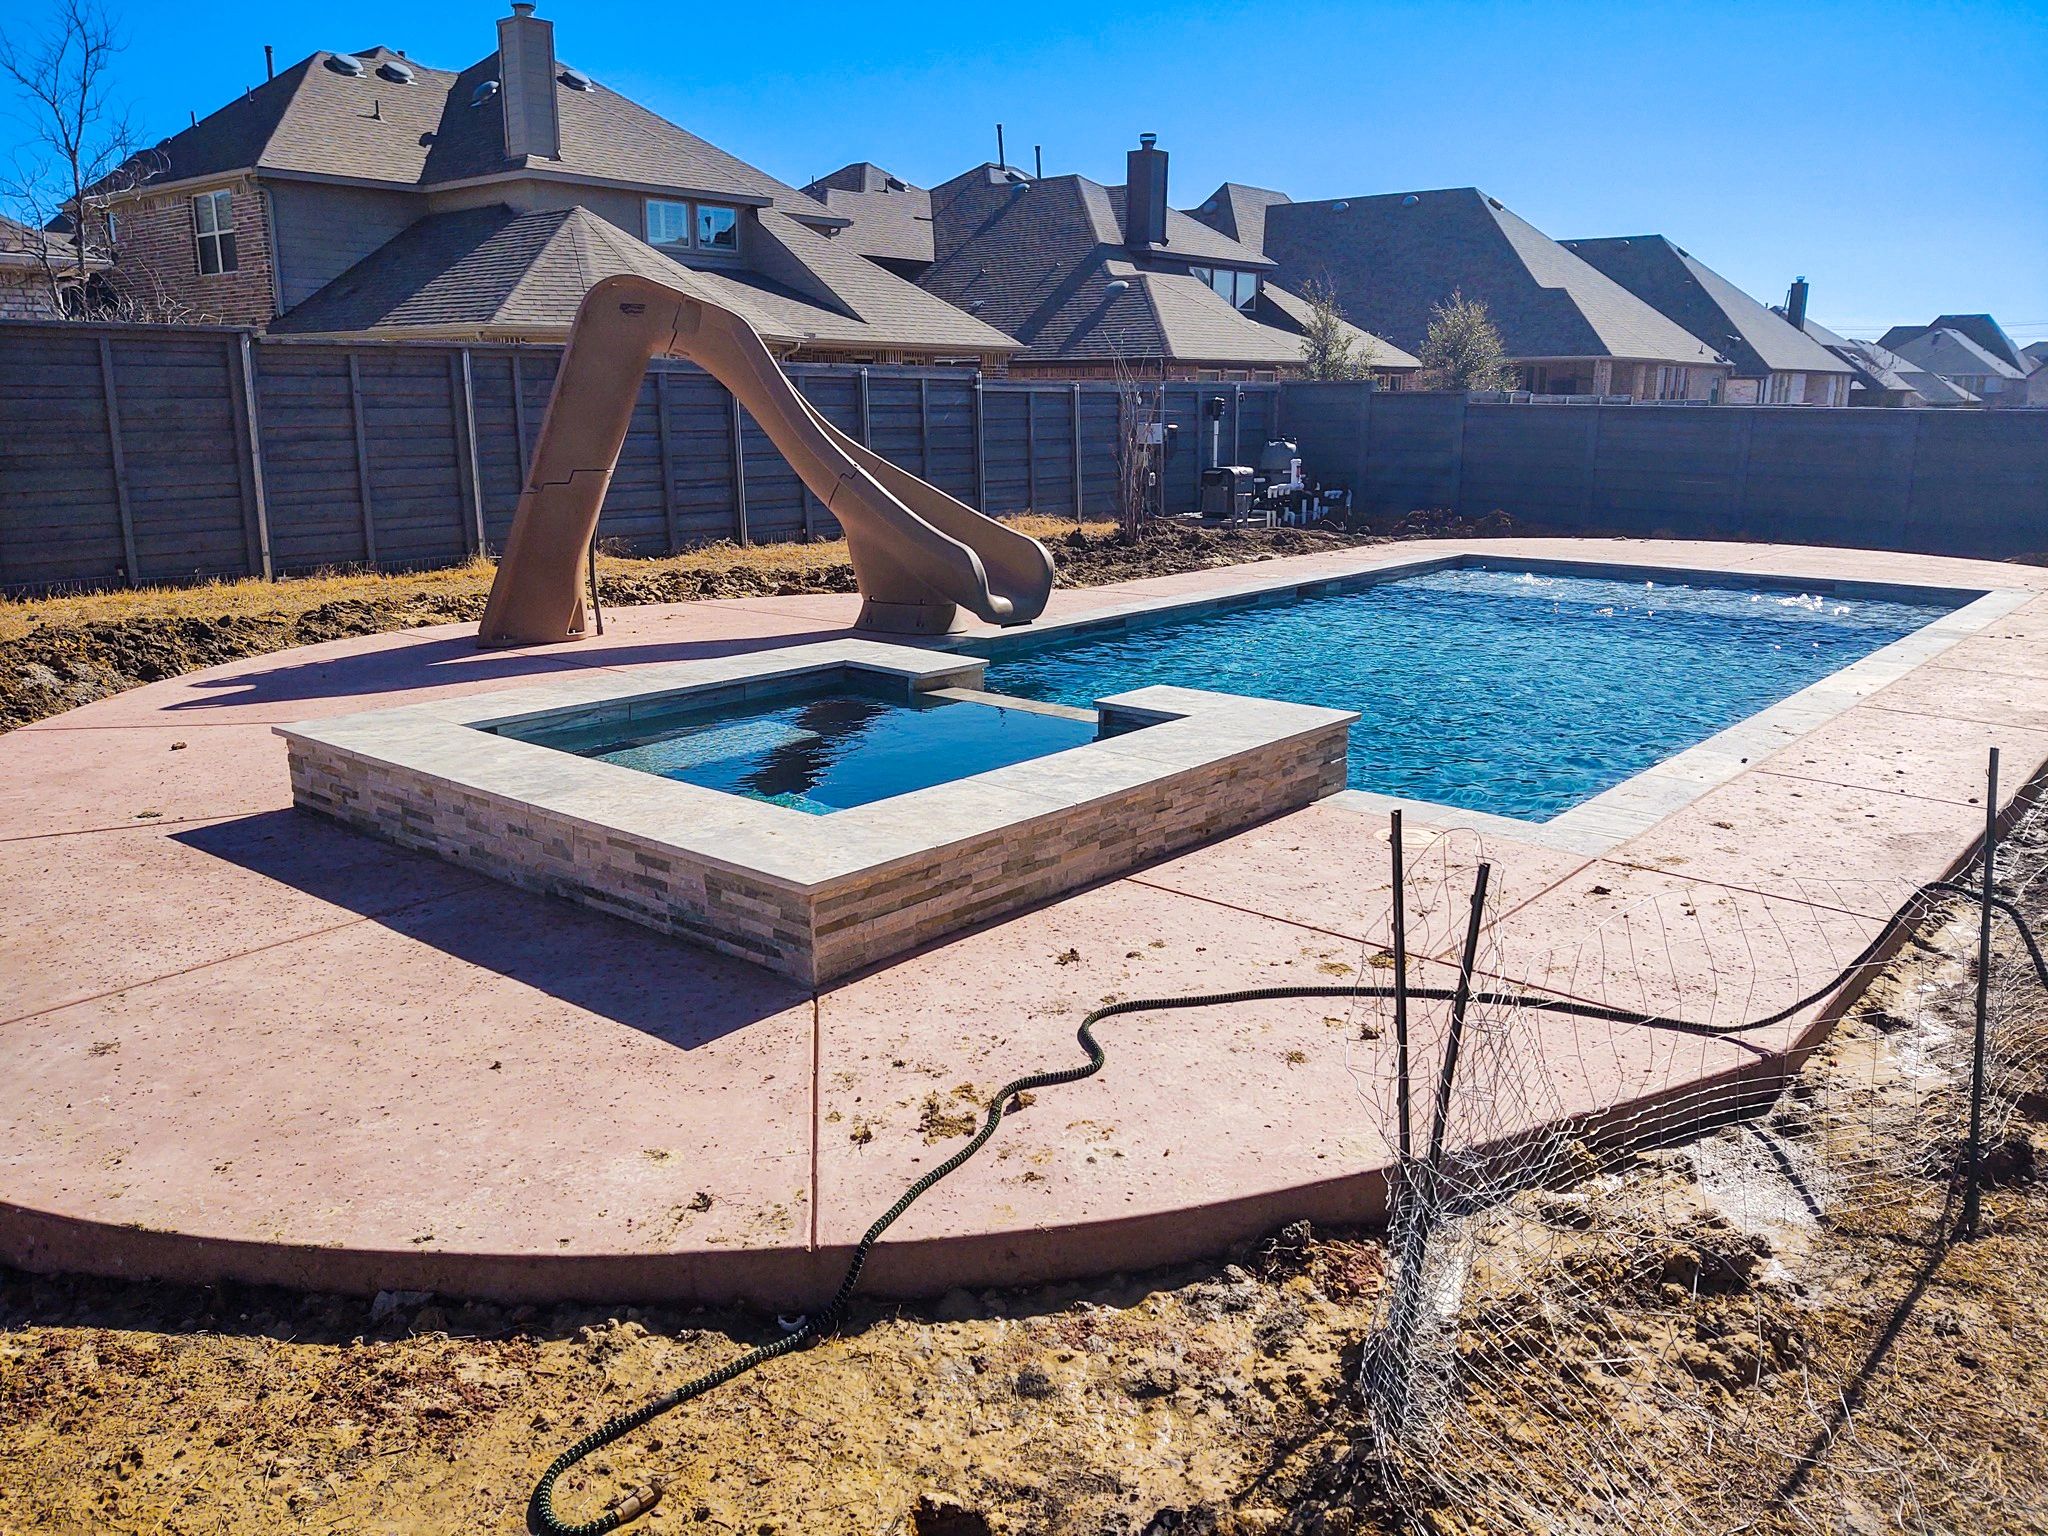 dallas richardson build a new pool 3 Dallas Pool Builders: Transforming Dreams into Reality with Integrity Pools